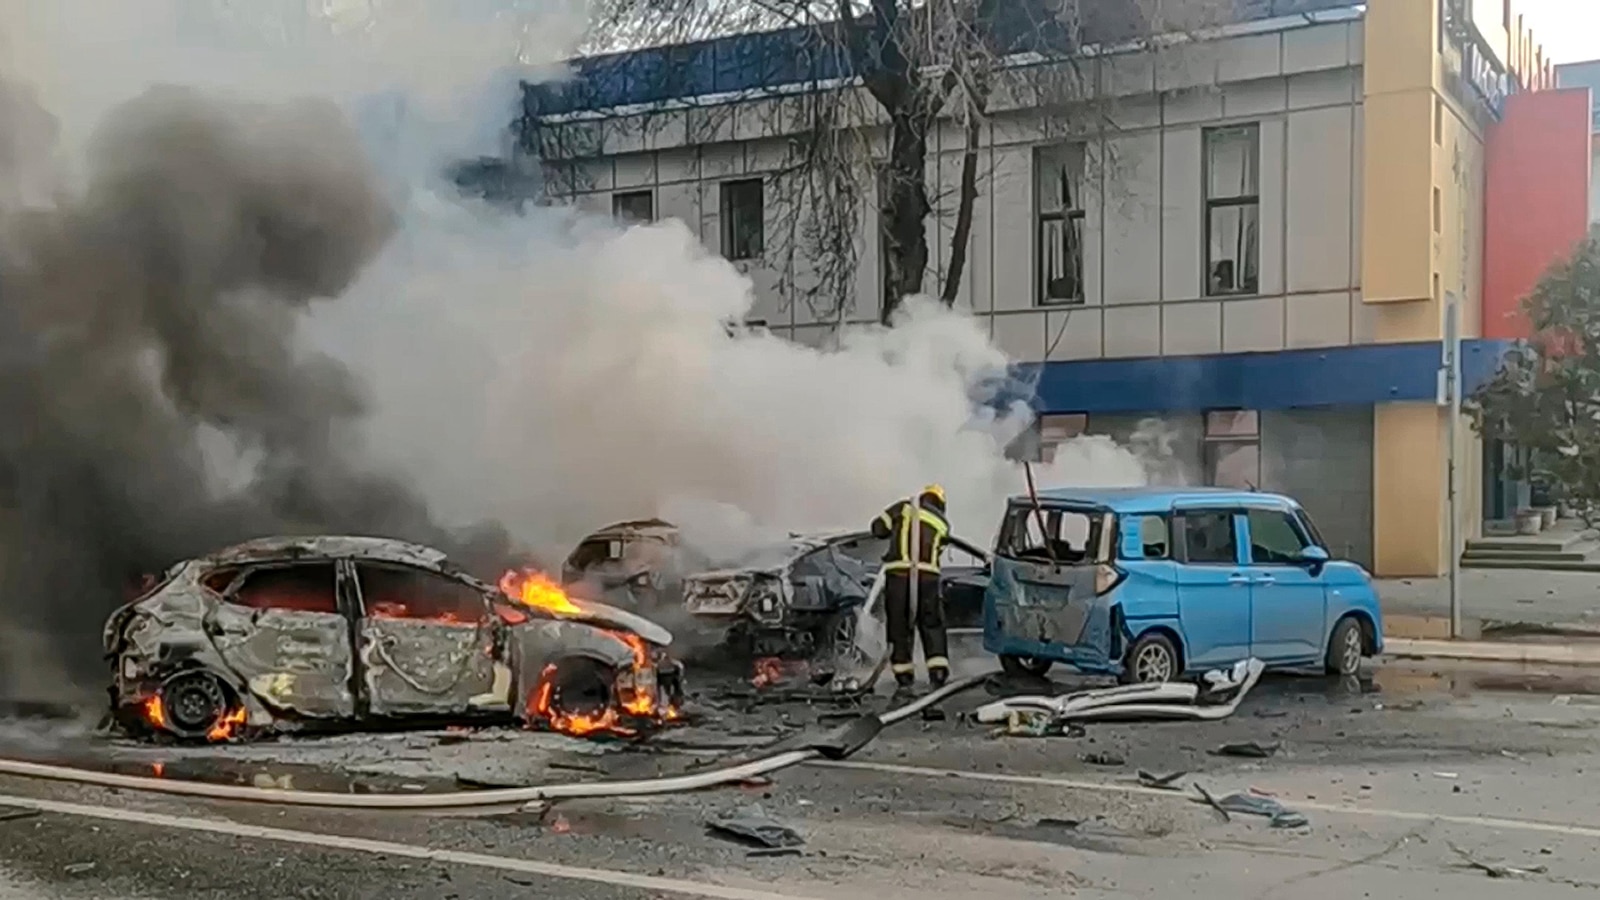 Officials report a significant fire caused by a Ukrainian drone attack on an oil depot in Russia